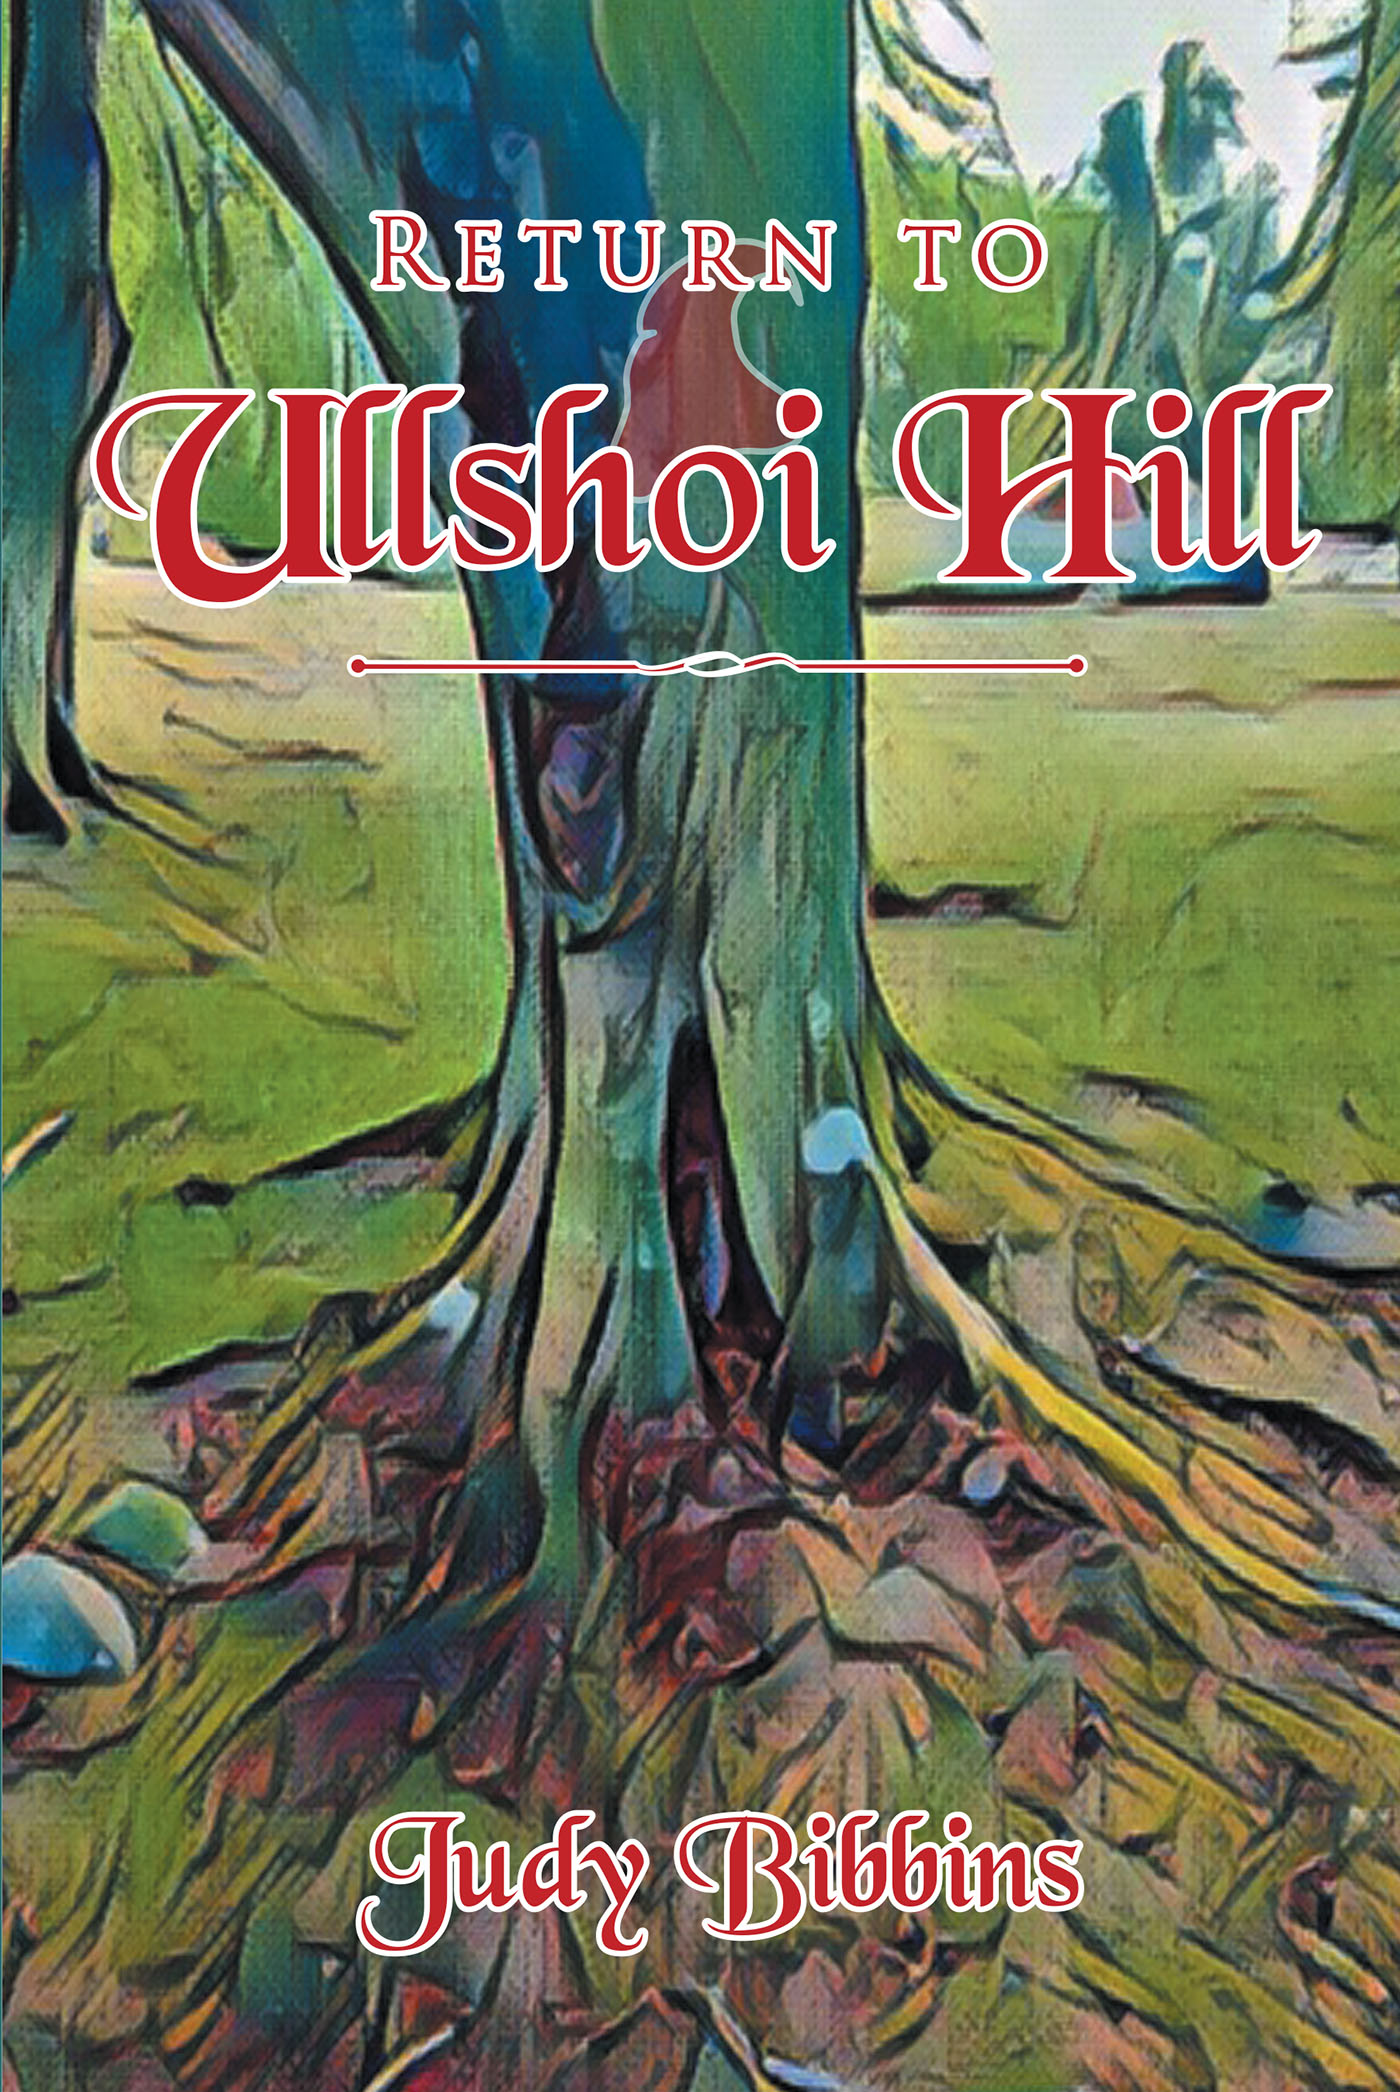 Author Judy Bibbins’s New Book "Return to Ullshoi Hill" Follows the Travels of a Tomte and a Farm Boy Who Set Off to Discover the True Meaning of Friendship and Home